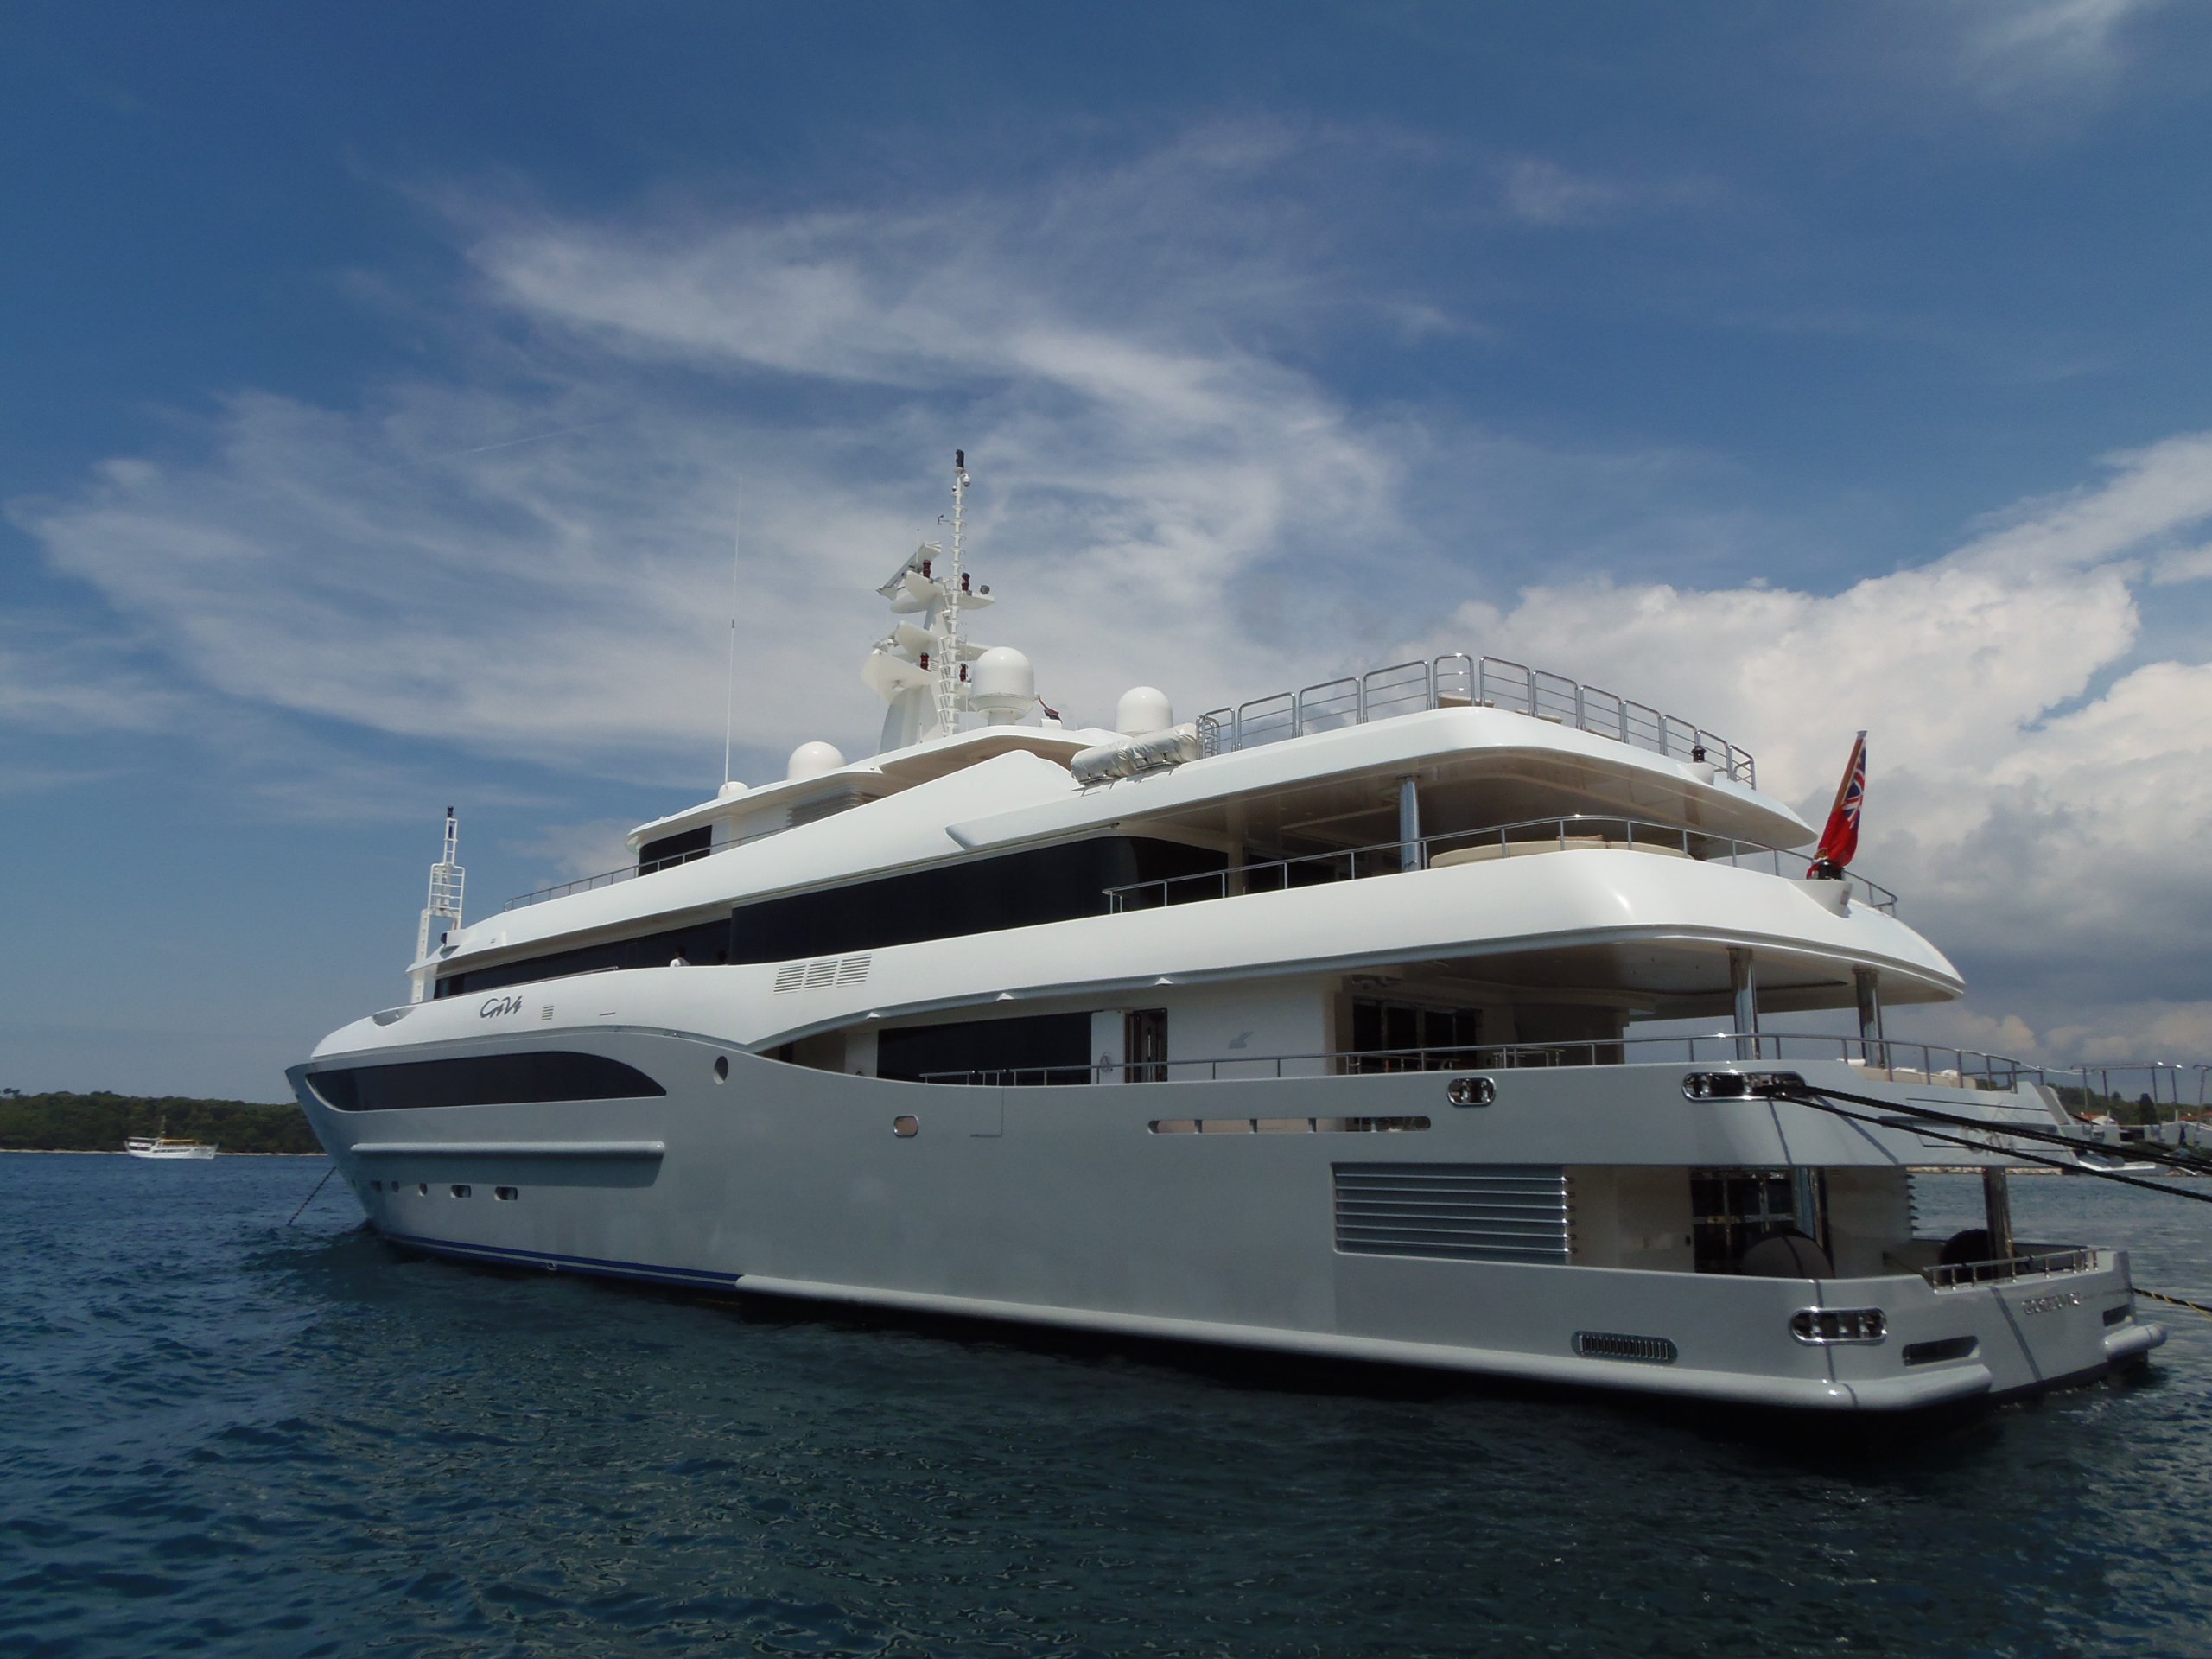 CONSTANCE Yacht • CRN • 2006 • Owner Alan Dabbiere